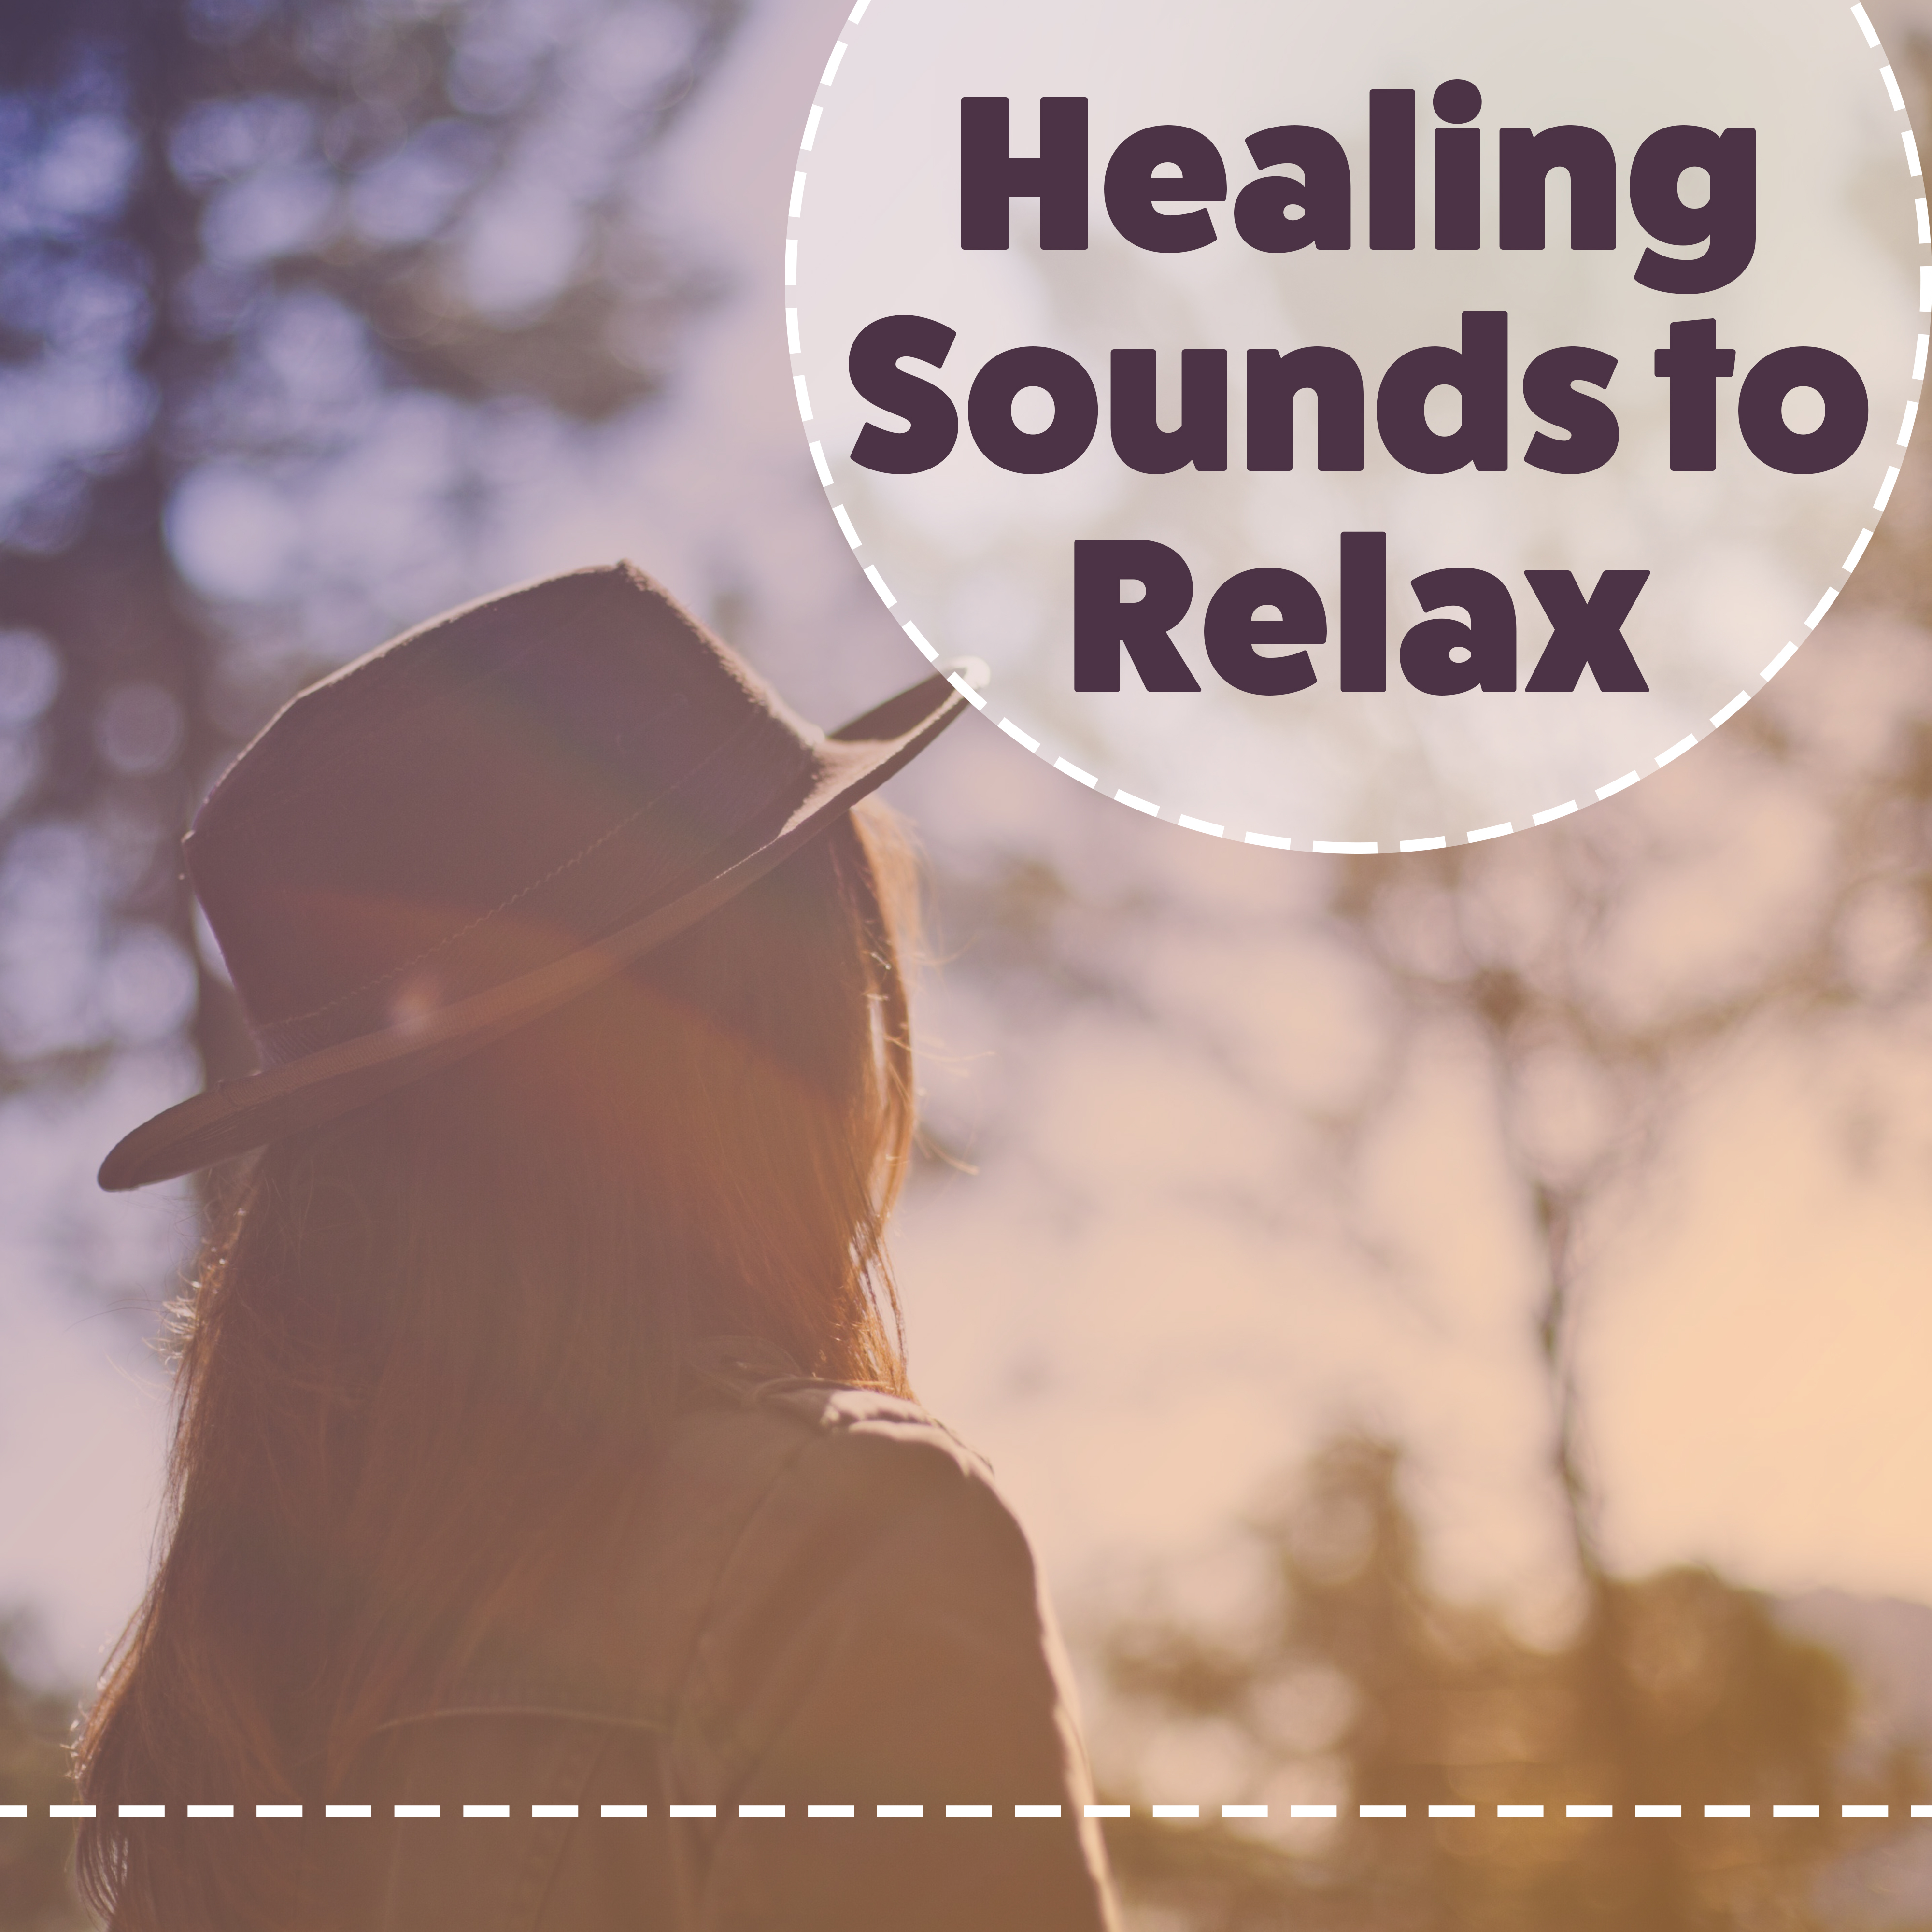 Healing Sounds to Relax  Calm Down  Rest, Soothing Nature Waves, Music to Help You Relax, New Age Relaxation